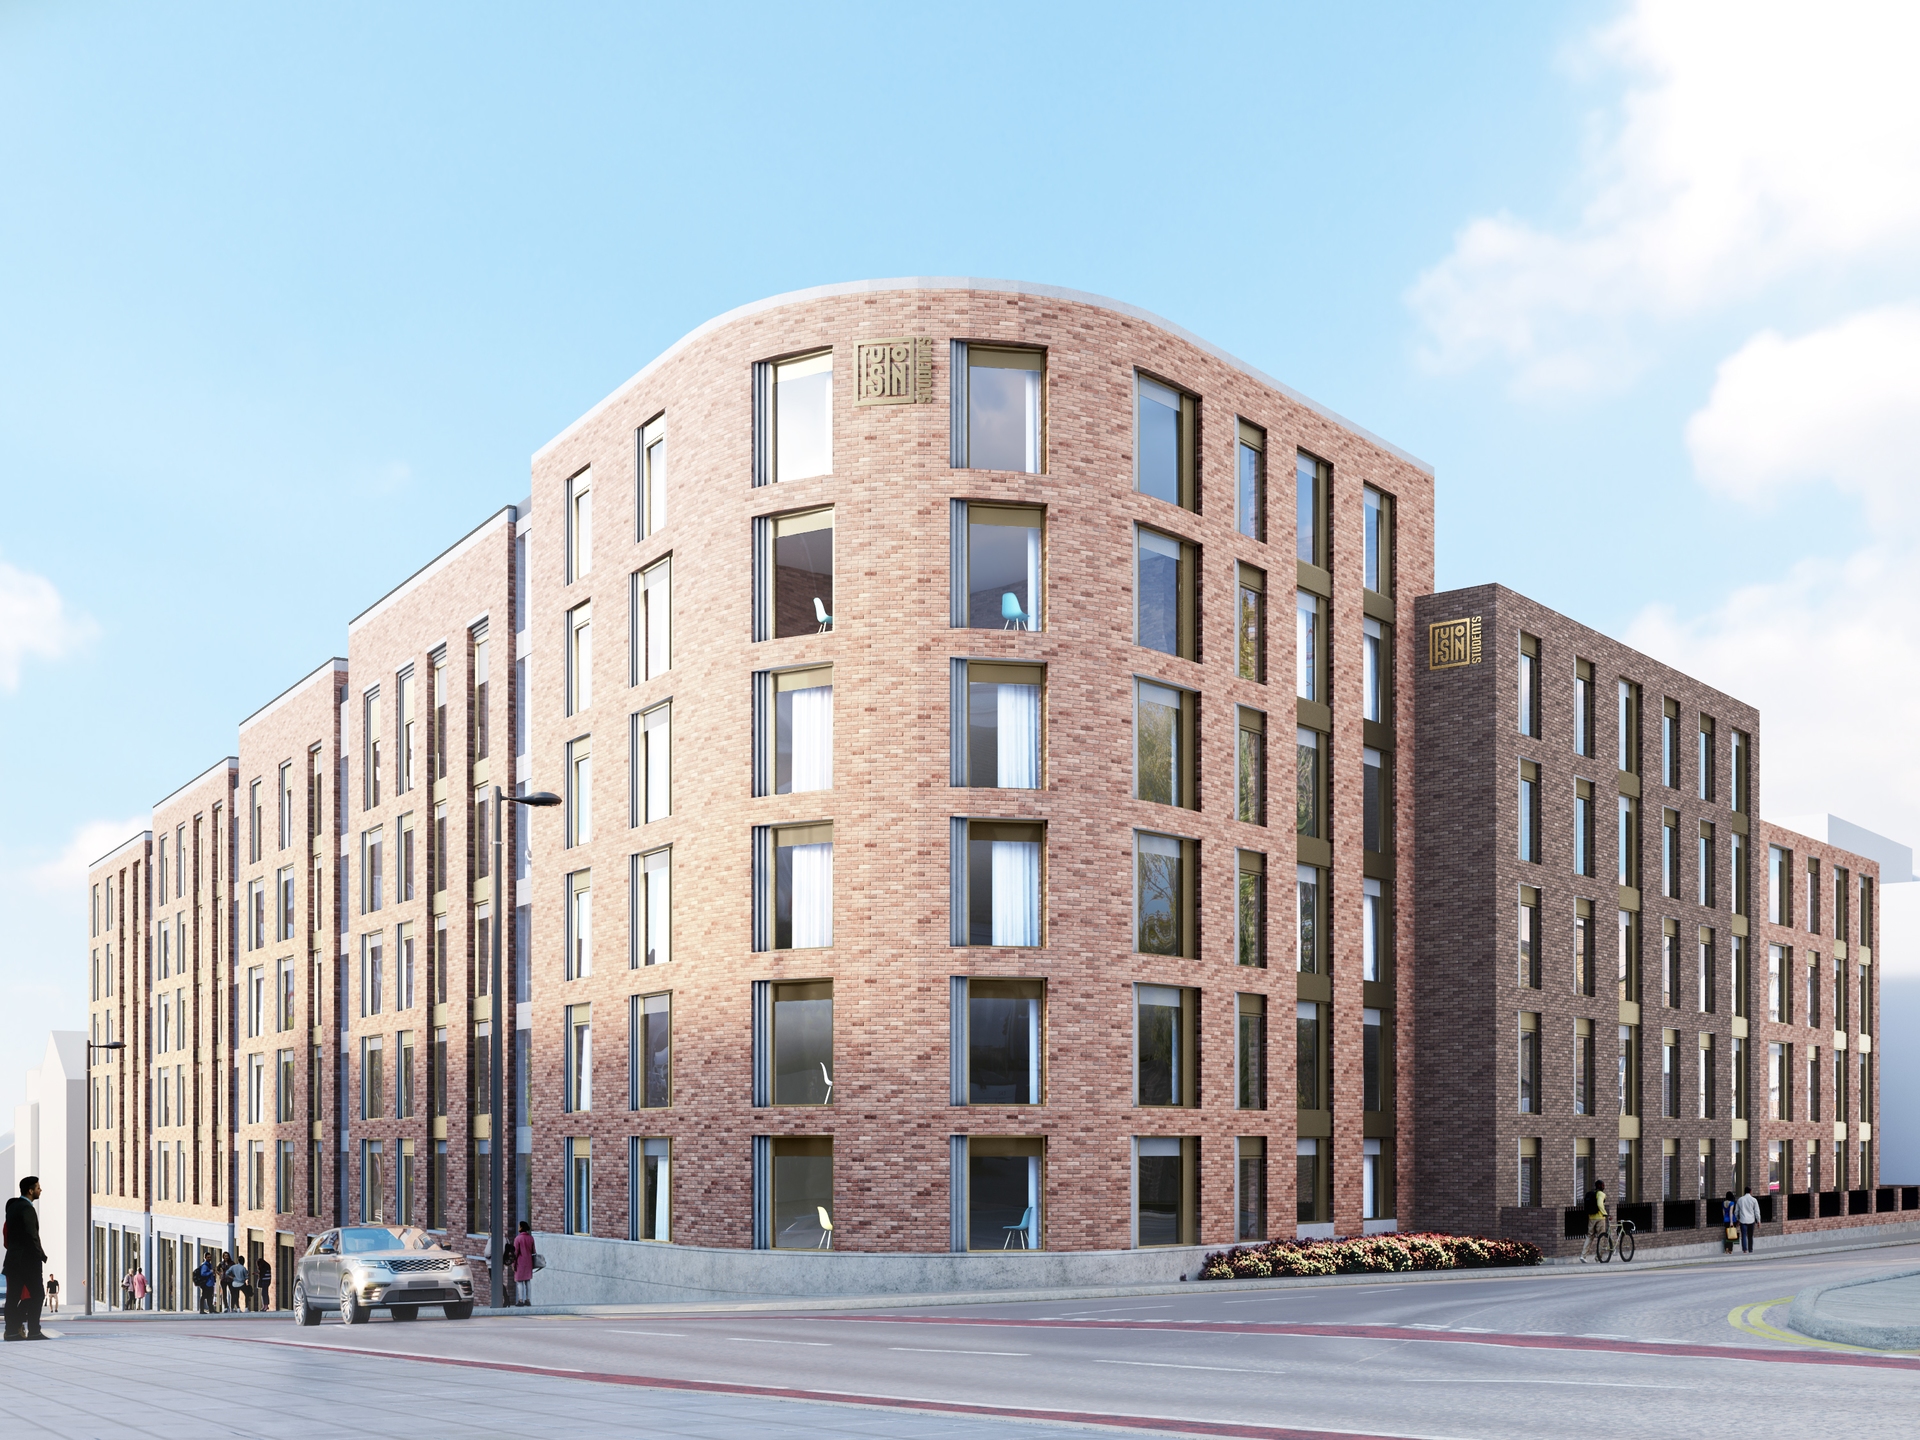 Upper Duke Street Fusion Developments plans in Liverpool is among several redevelopments by the company.